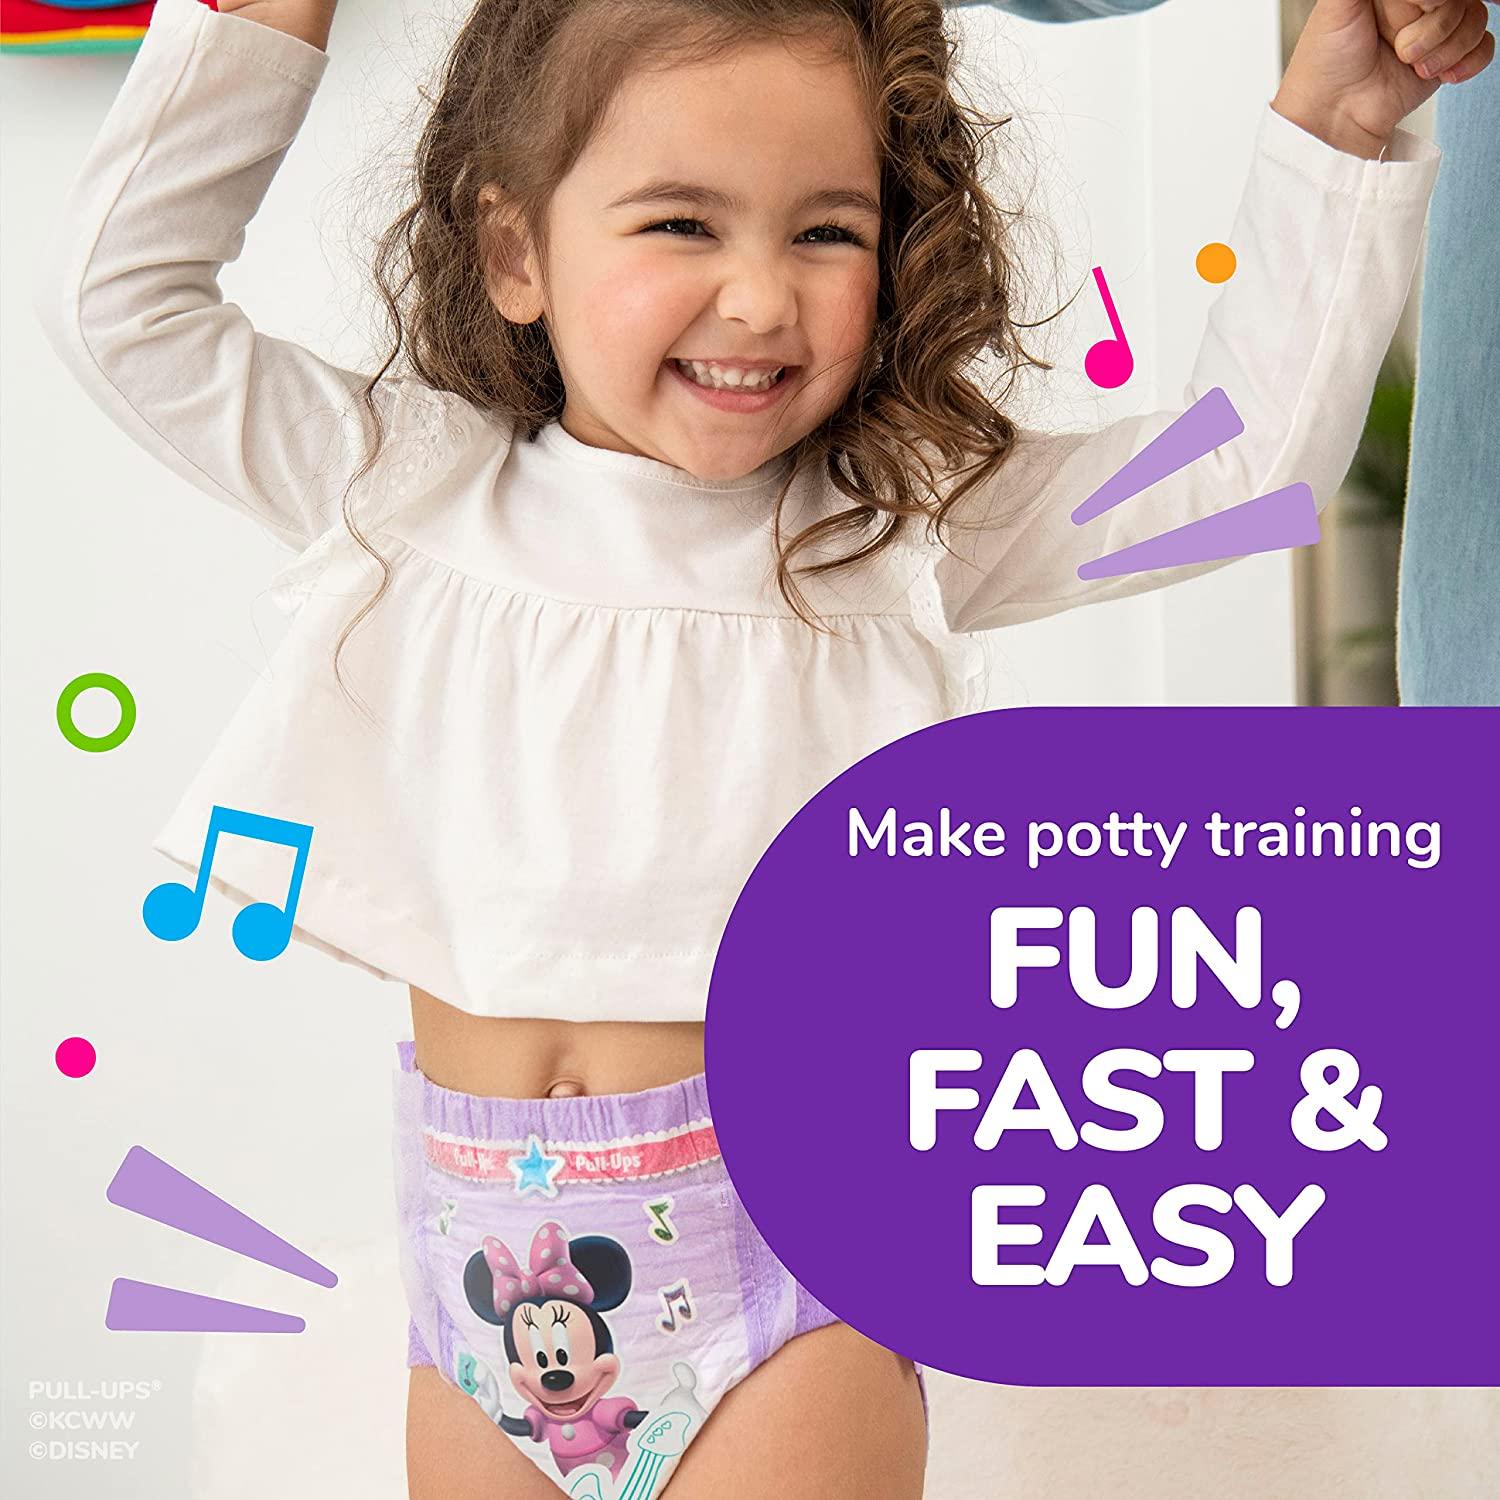 Huggies Pull-Ups Plus Training Pants For Girls One Color, 3T-4T